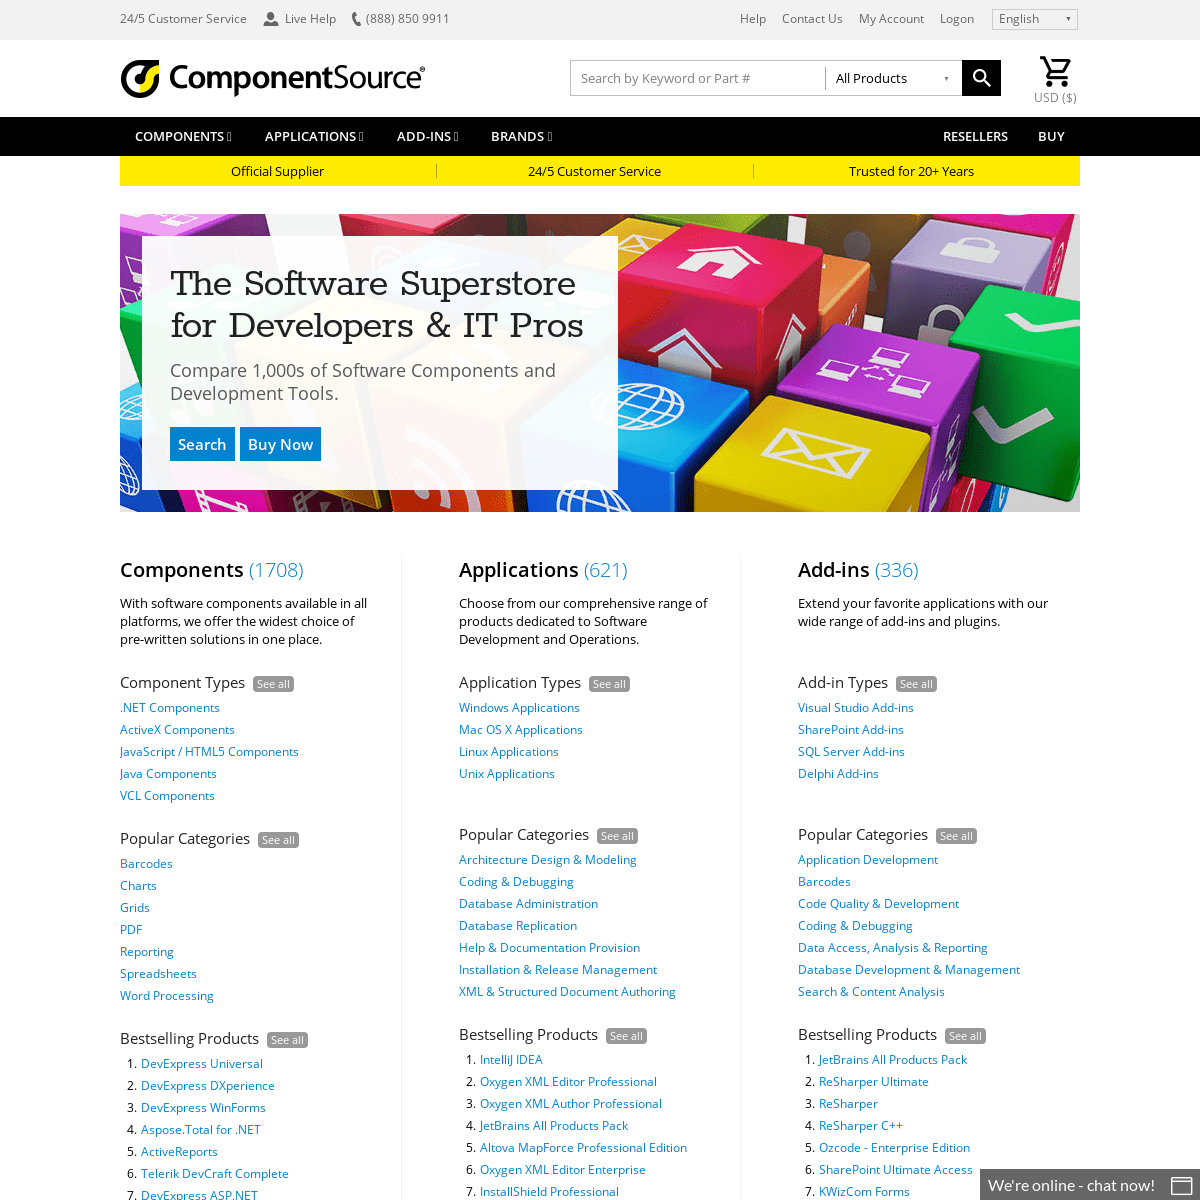 A complete backup of componentsource.com